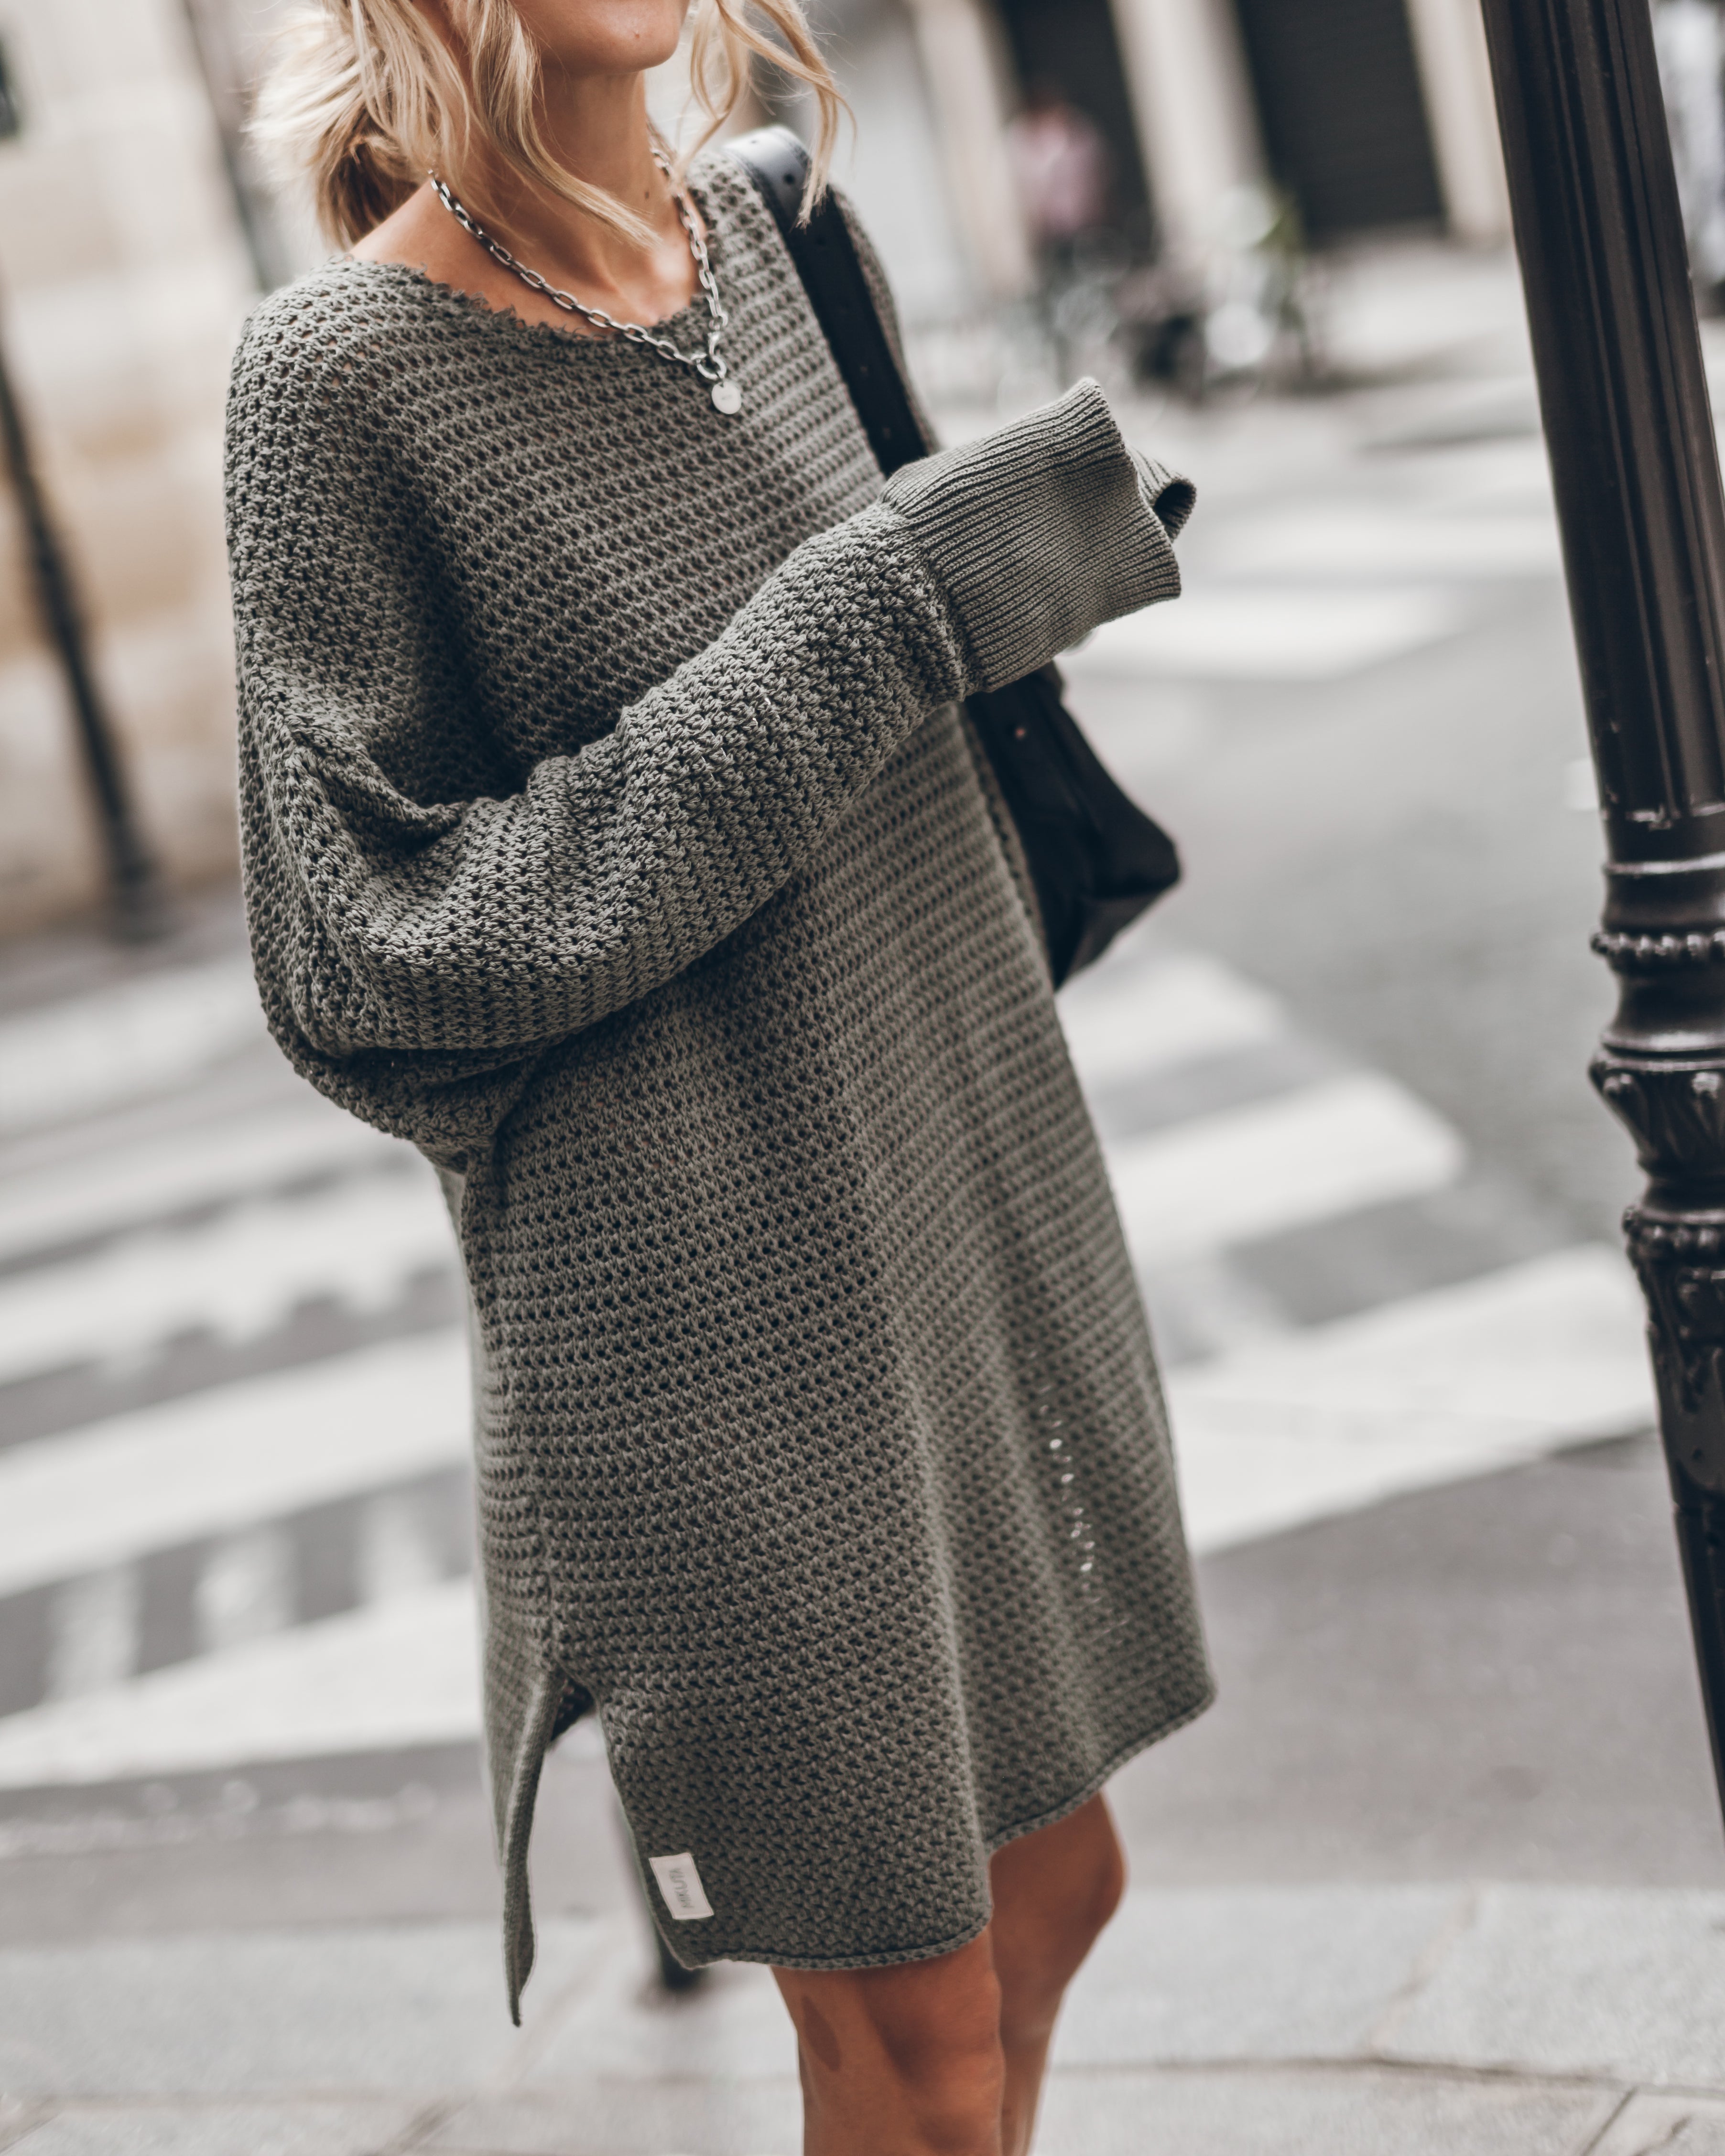 The Green Long Knitted Sweater